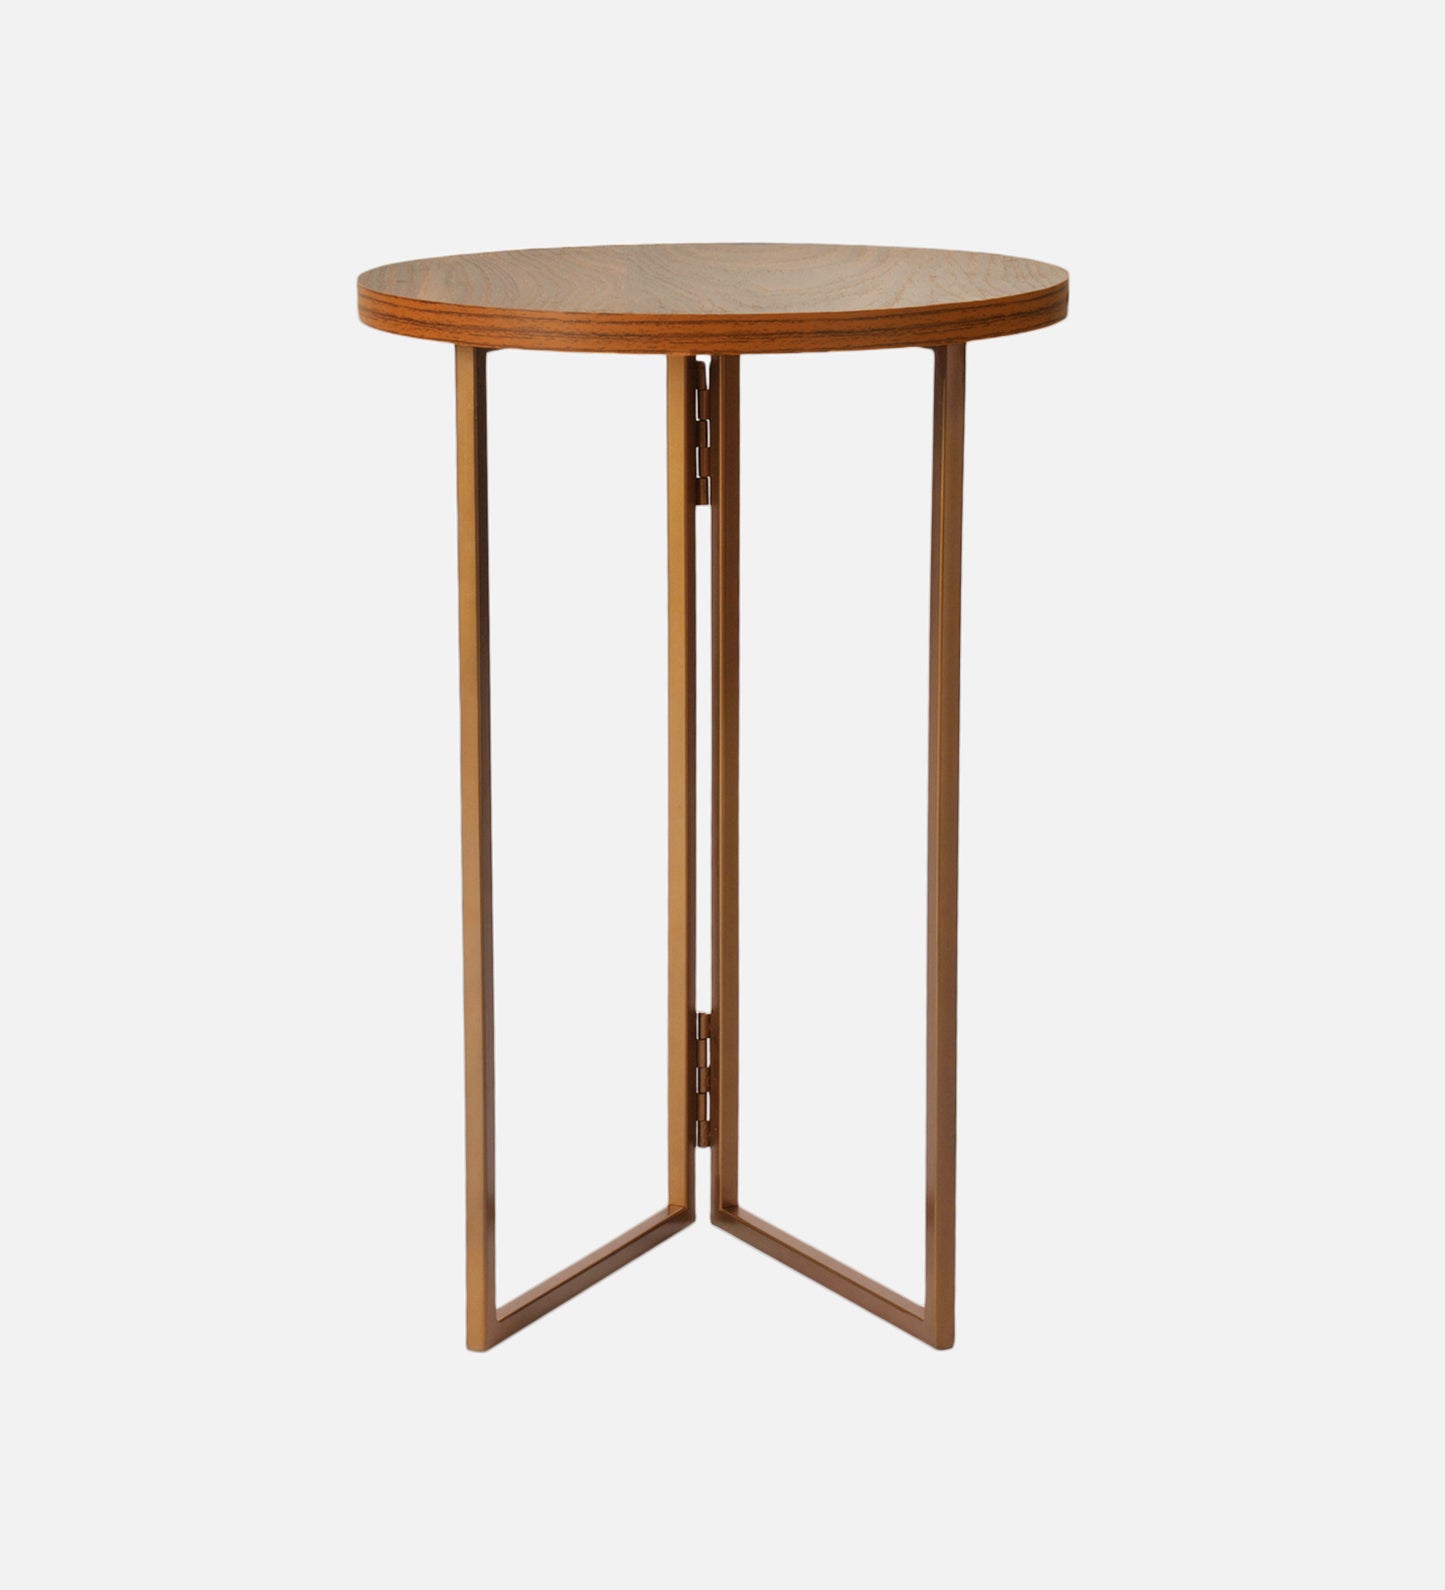 Teak Hues (Antique Gold Legs) Round Oblique Side Tables, Wooden Tables, Living Room Decor by A Tiny Mistake